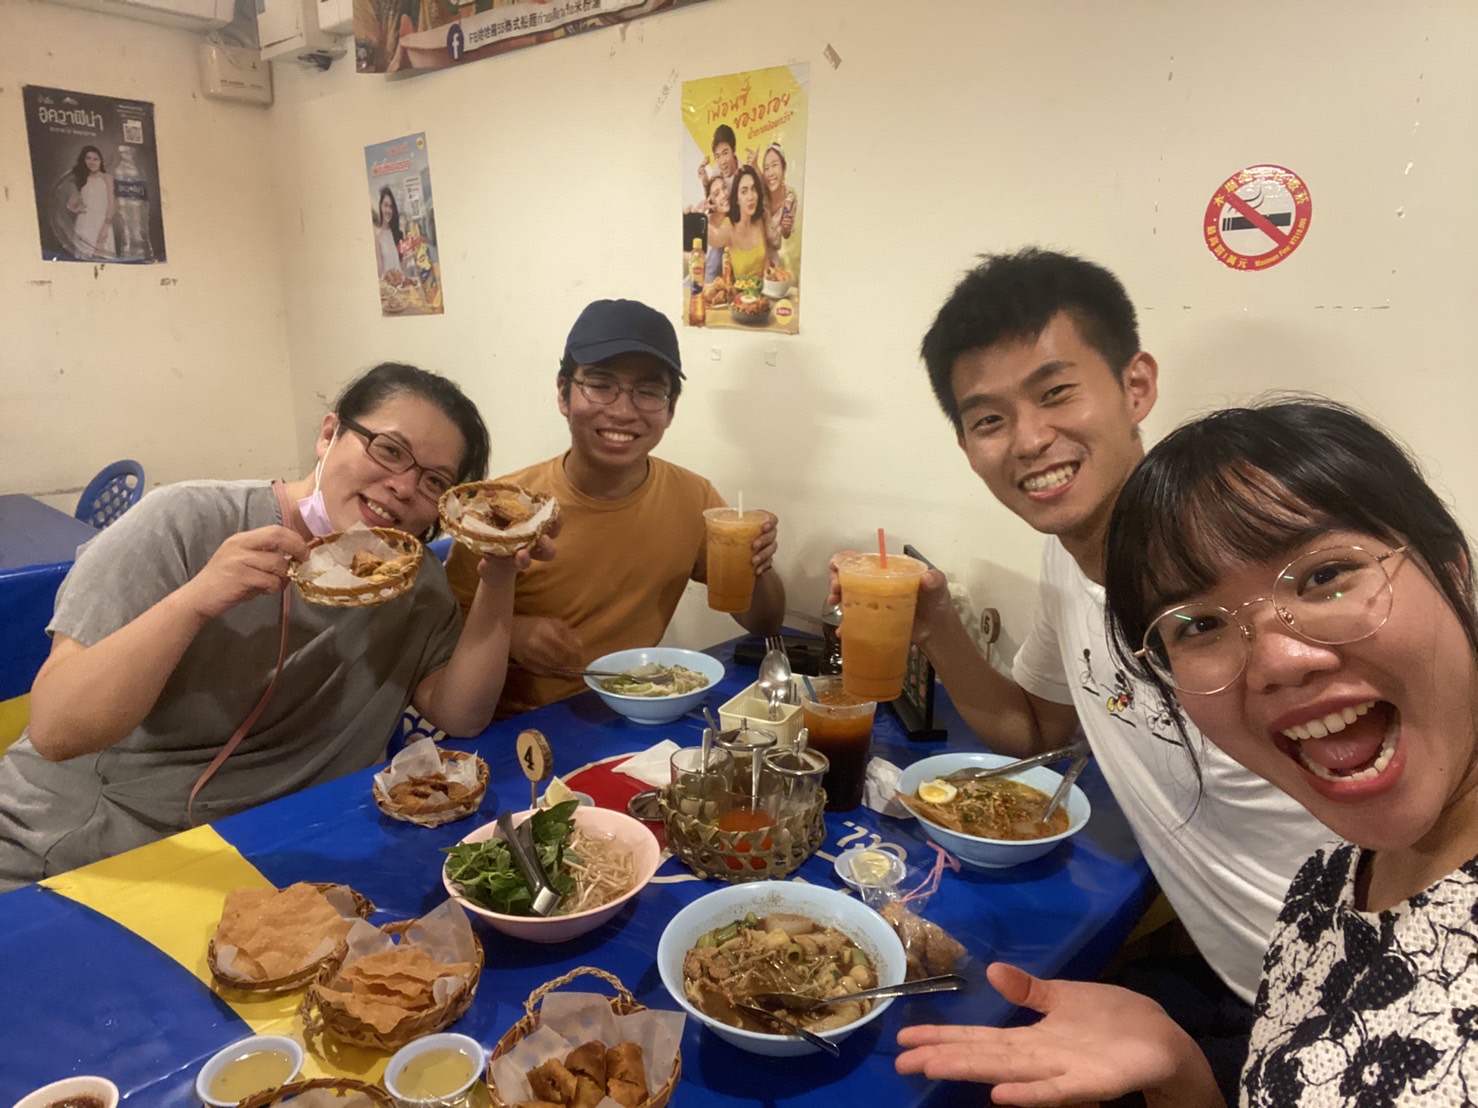 The hosts from Taiwan Immigrants’ Global News Network tried out the boat noodles from “Hahalo 55 Boat Noodles.” (Photo courtesy of Taiwan Immigrants’ Global News Network)